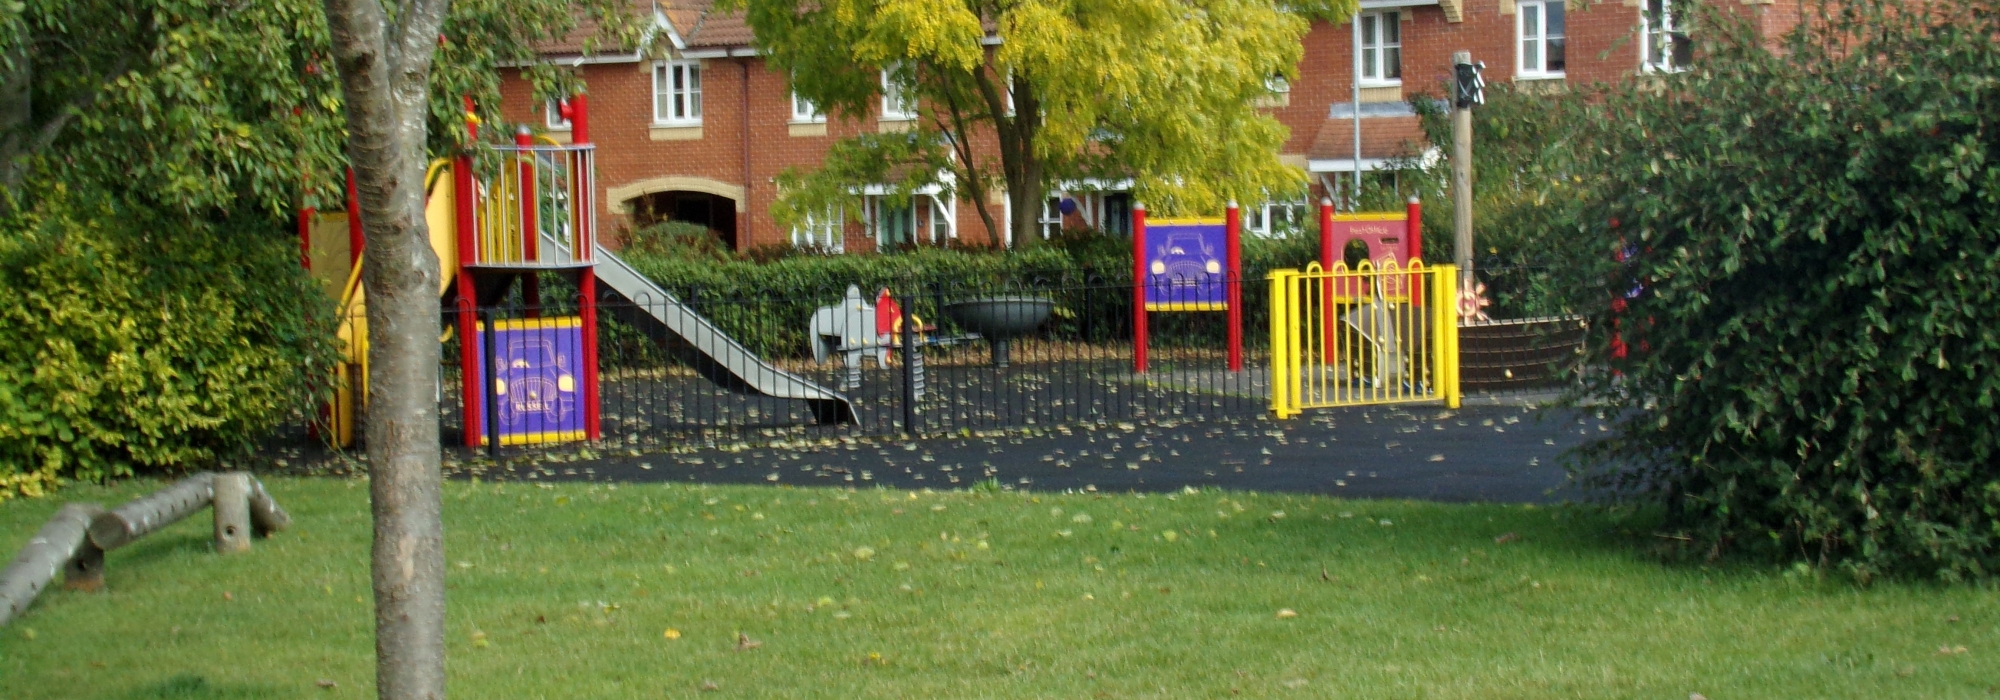 Vic Green play area